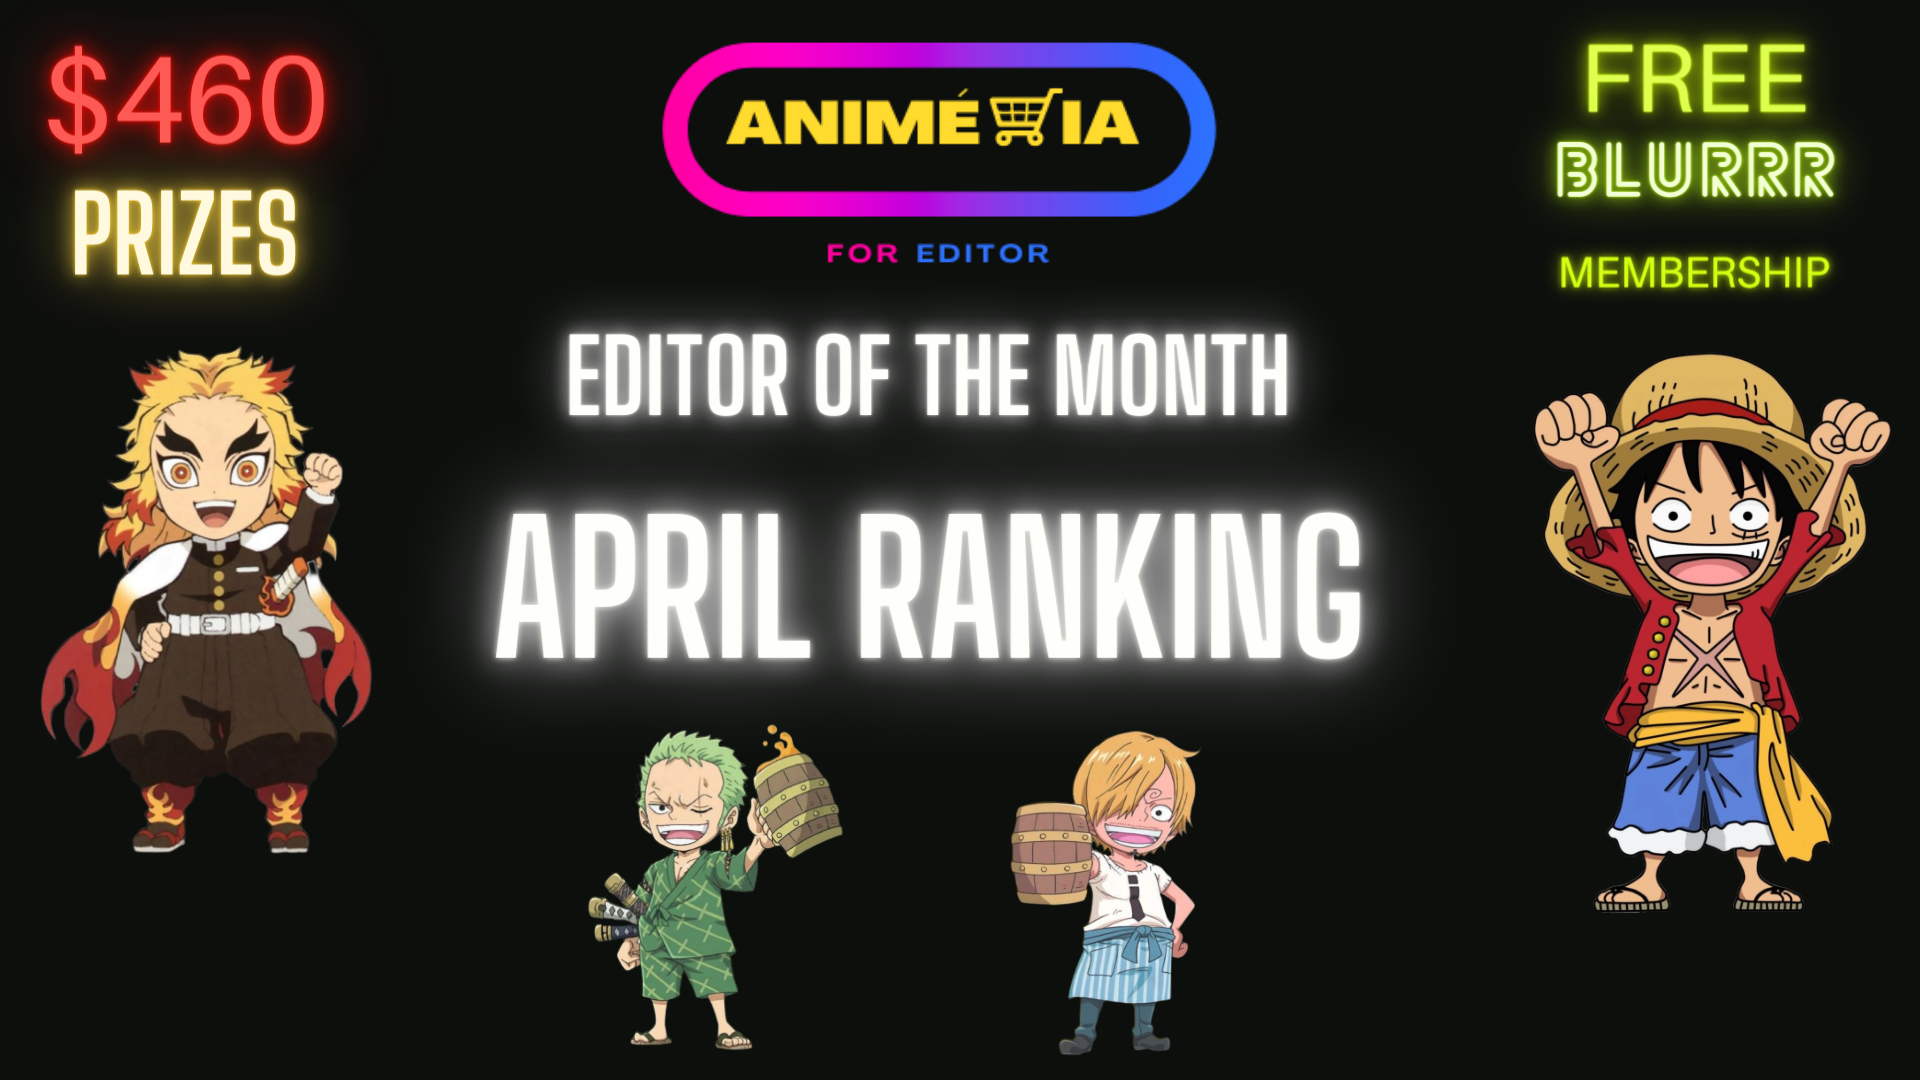 April Ranking “Editor Of the Month”